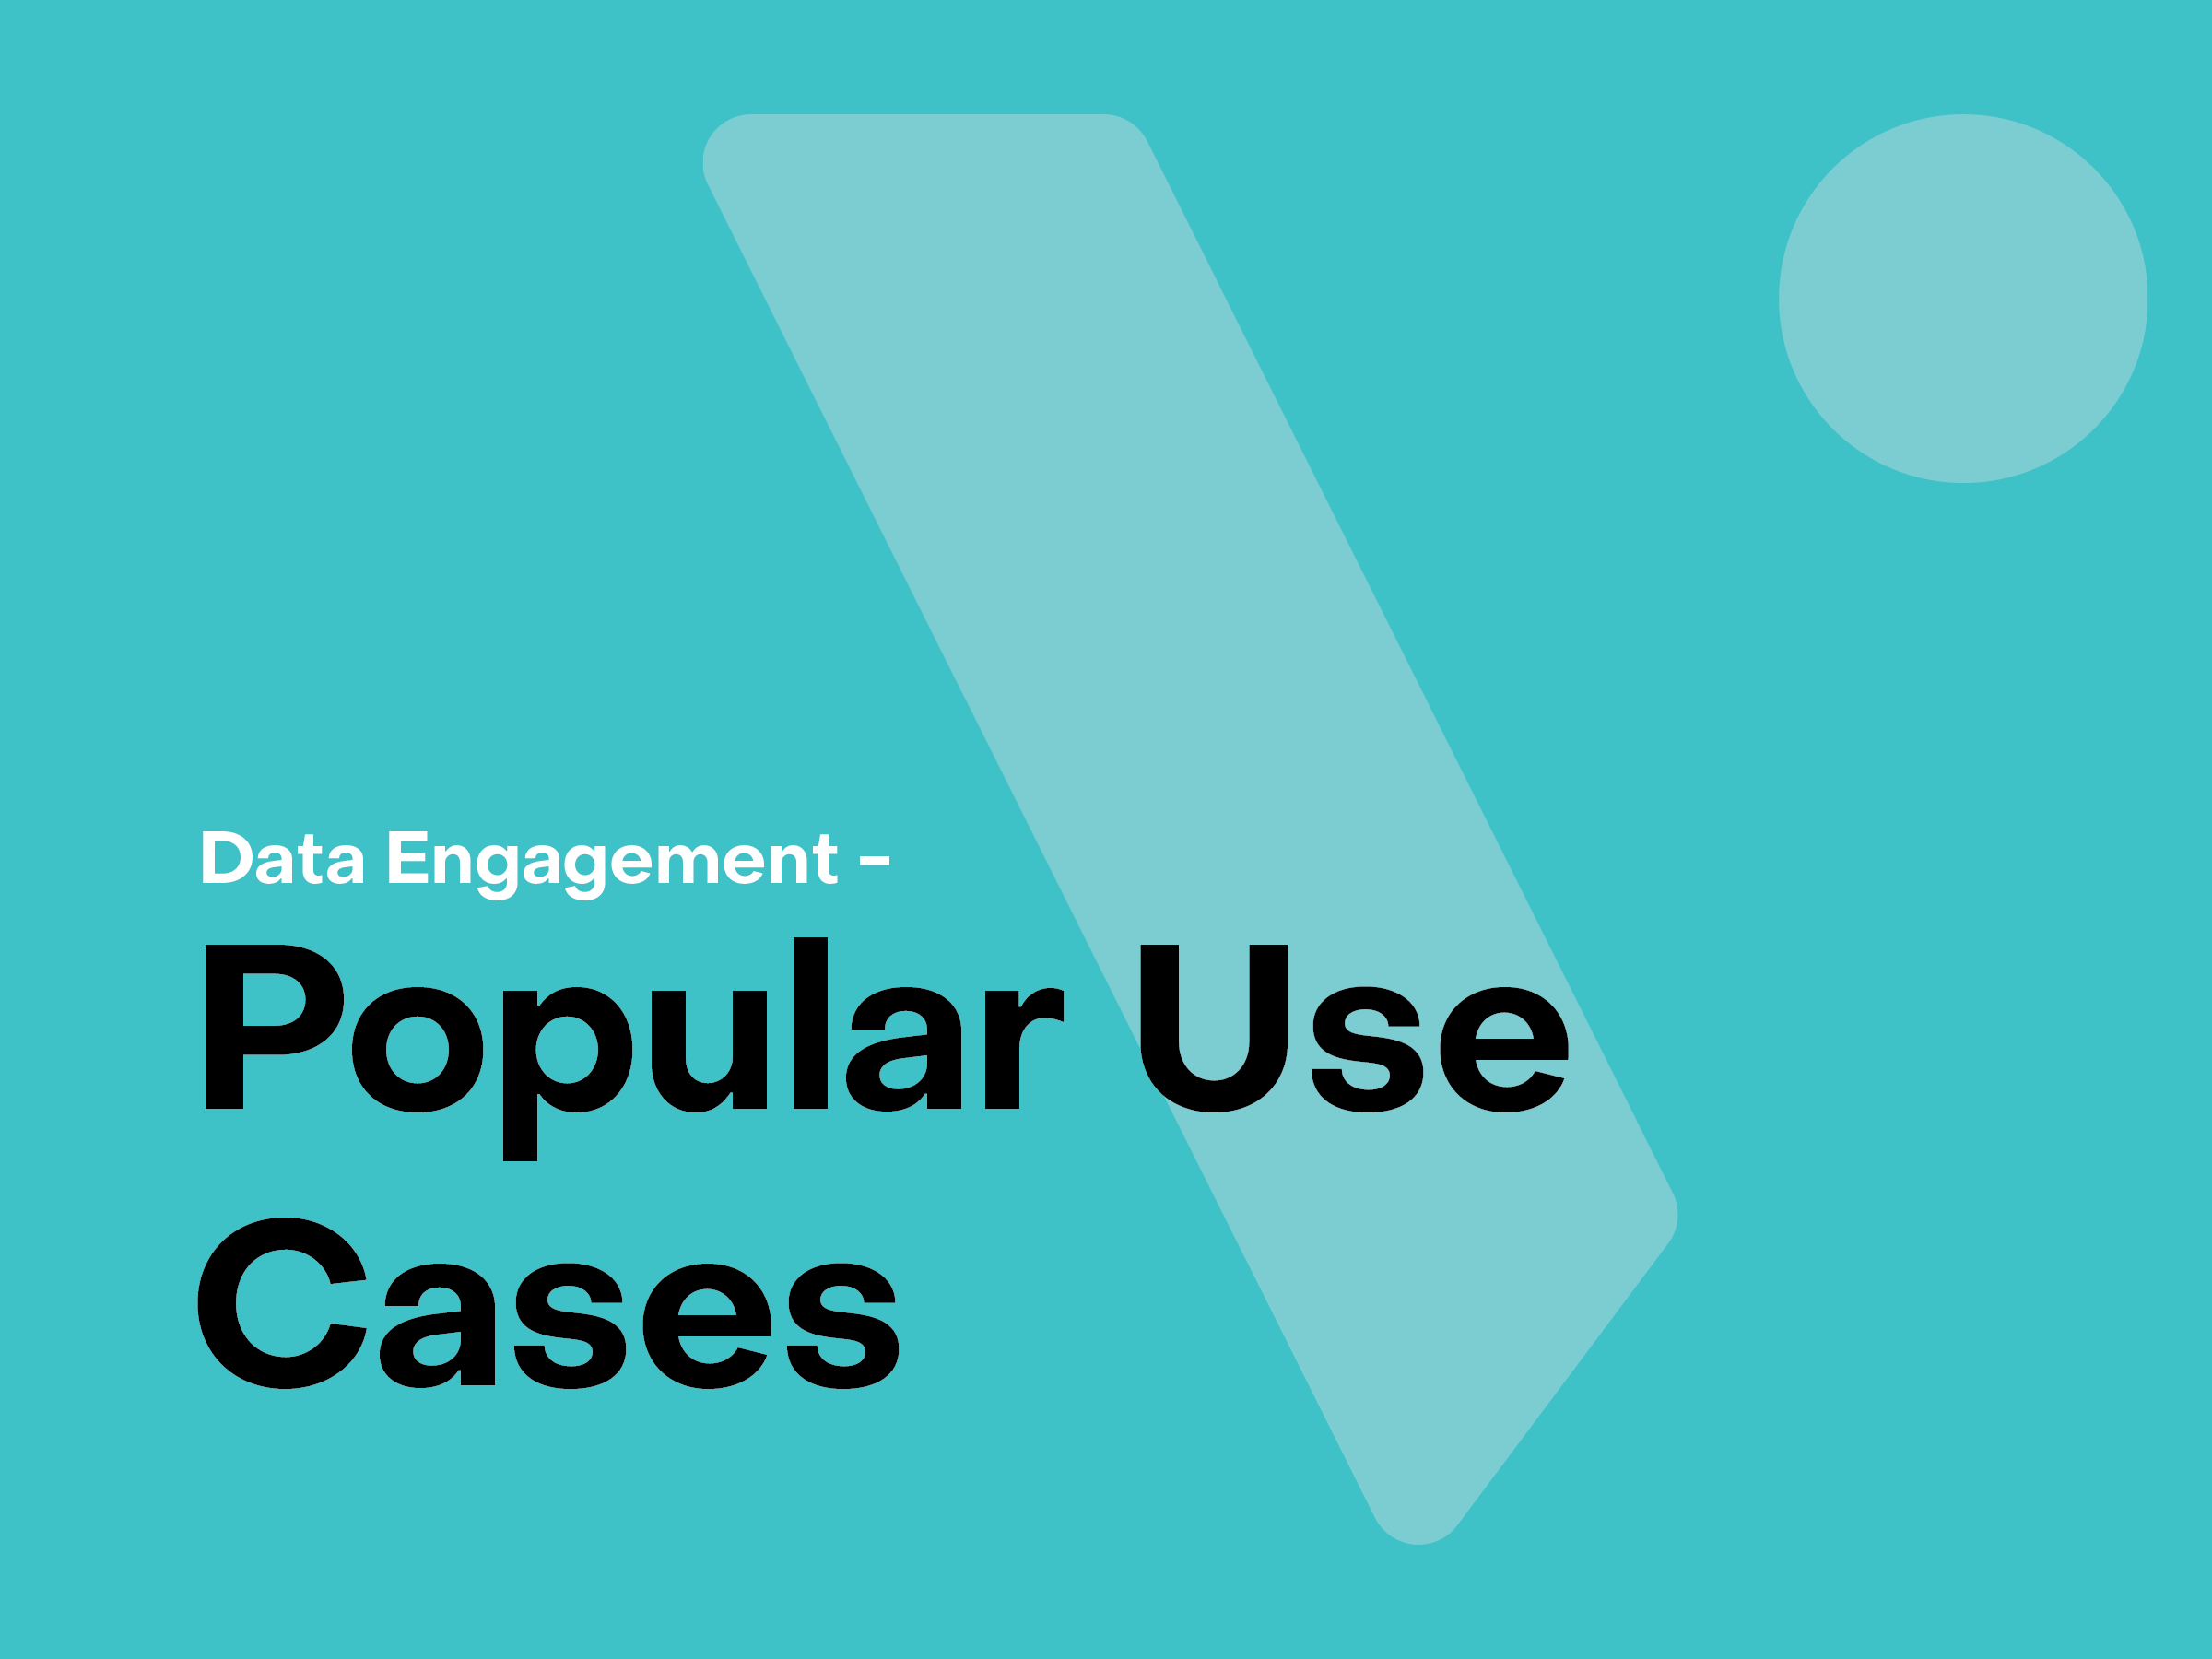 Data Engagement - Popular Use Cases